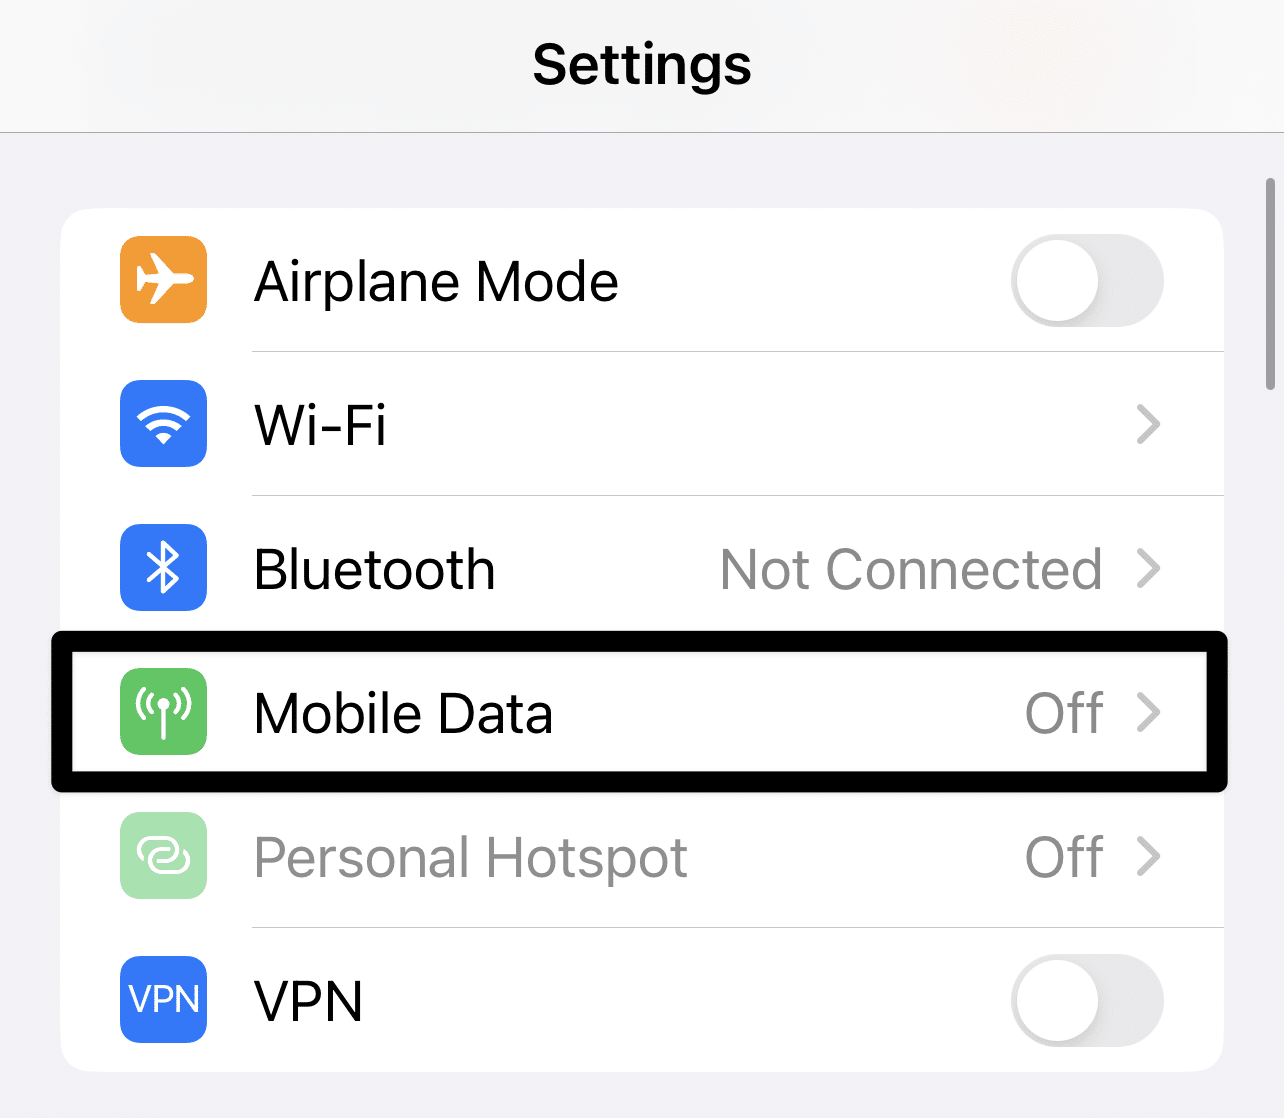 Ensure that mobile data usage is turned on for app on iOS/iPhone to fix YouTube "No Internet Connection", "Please Check Your Network Connection", "You're Offline" errors